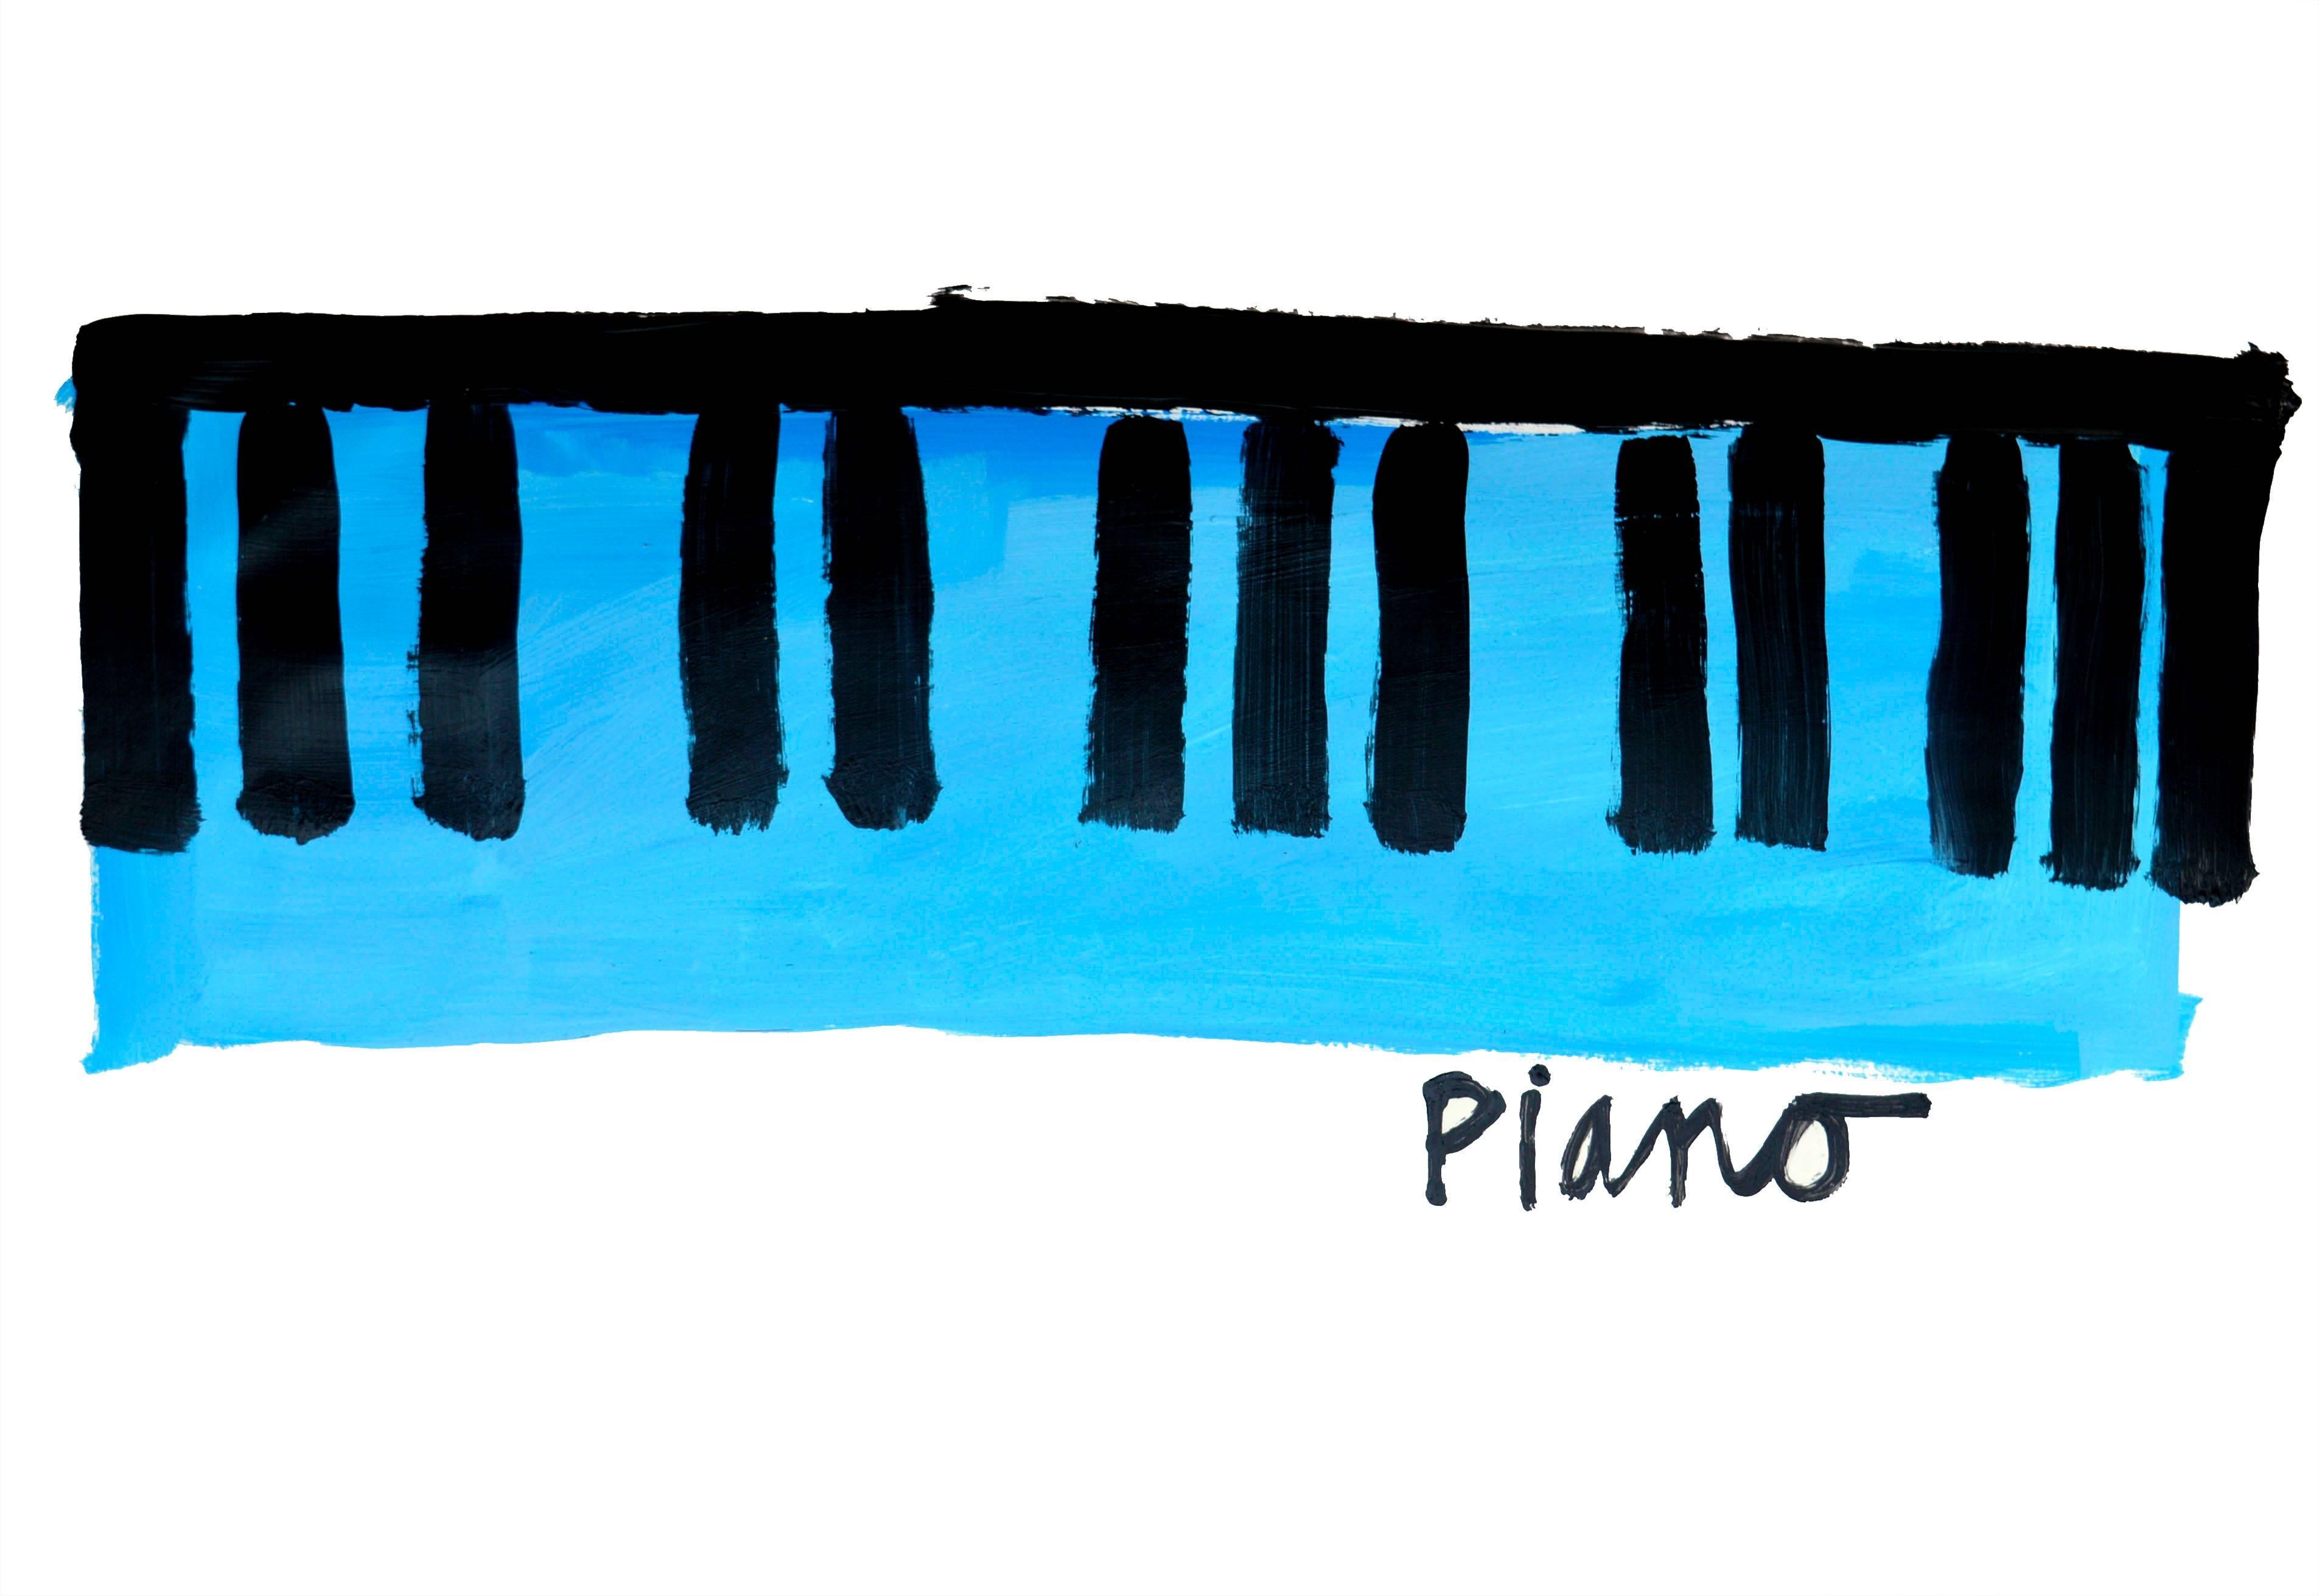 Michael William Eggleston Abstract Painting - Piano 